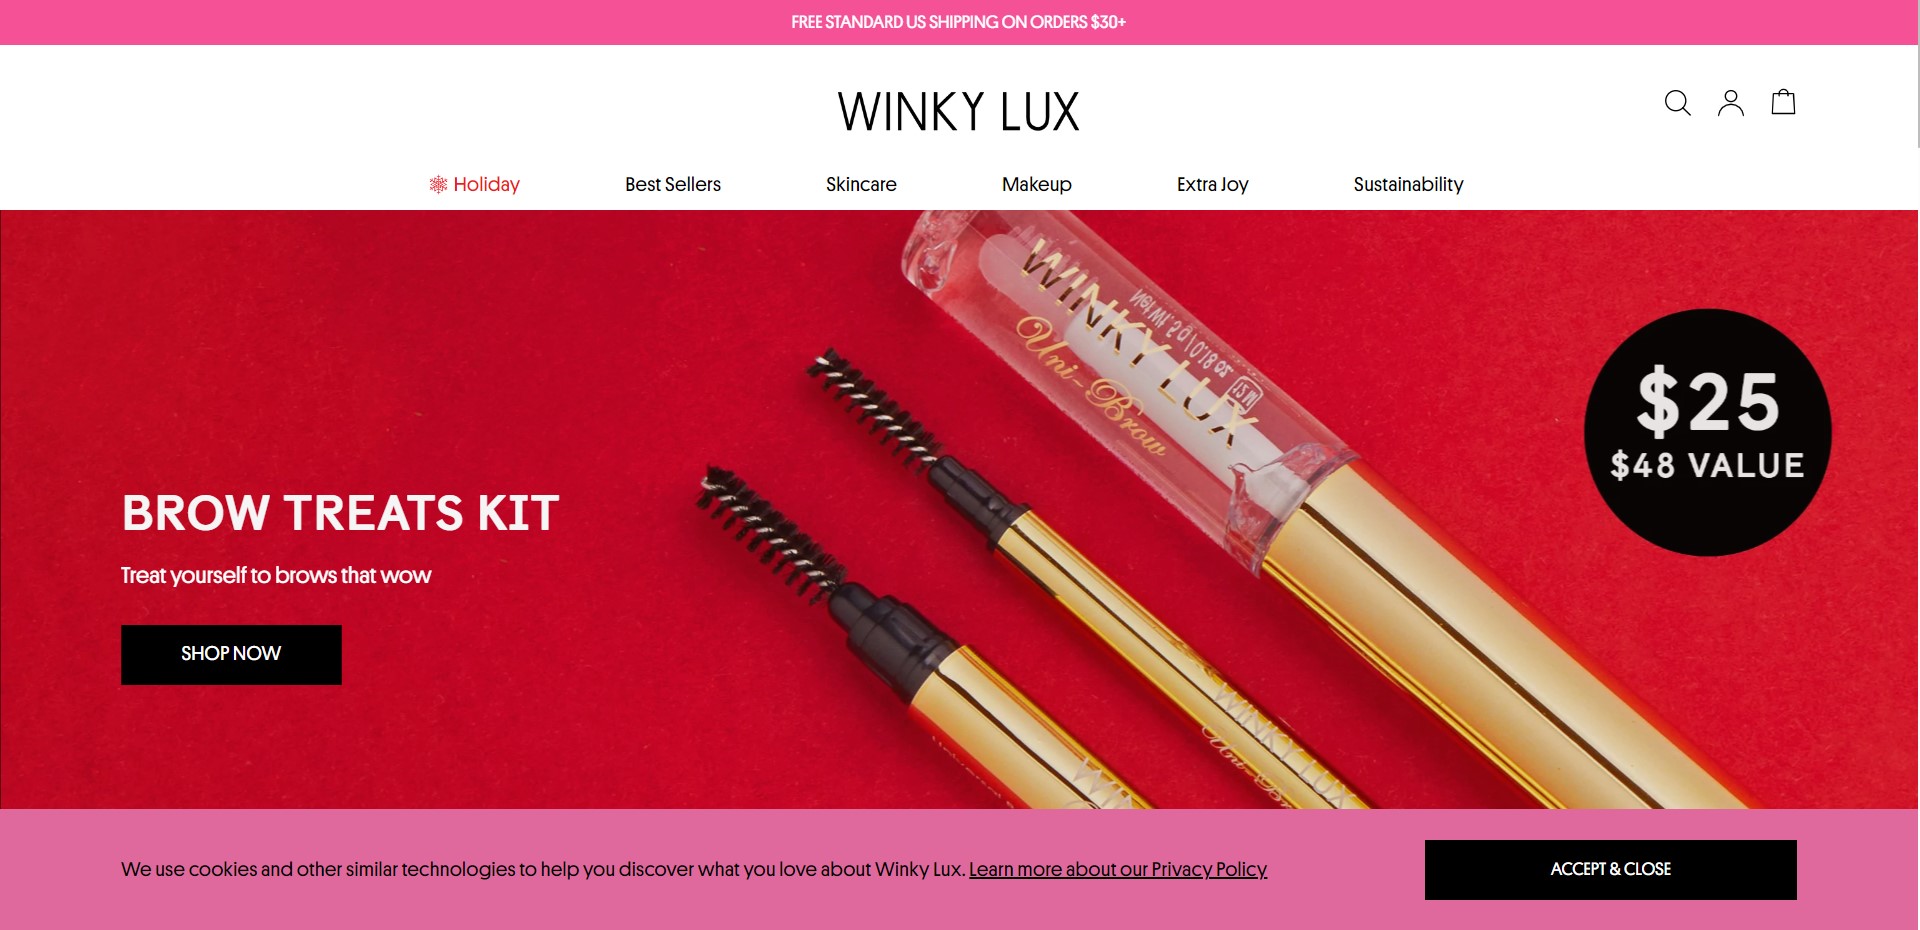 Shopify beauty stores: Winky Lux